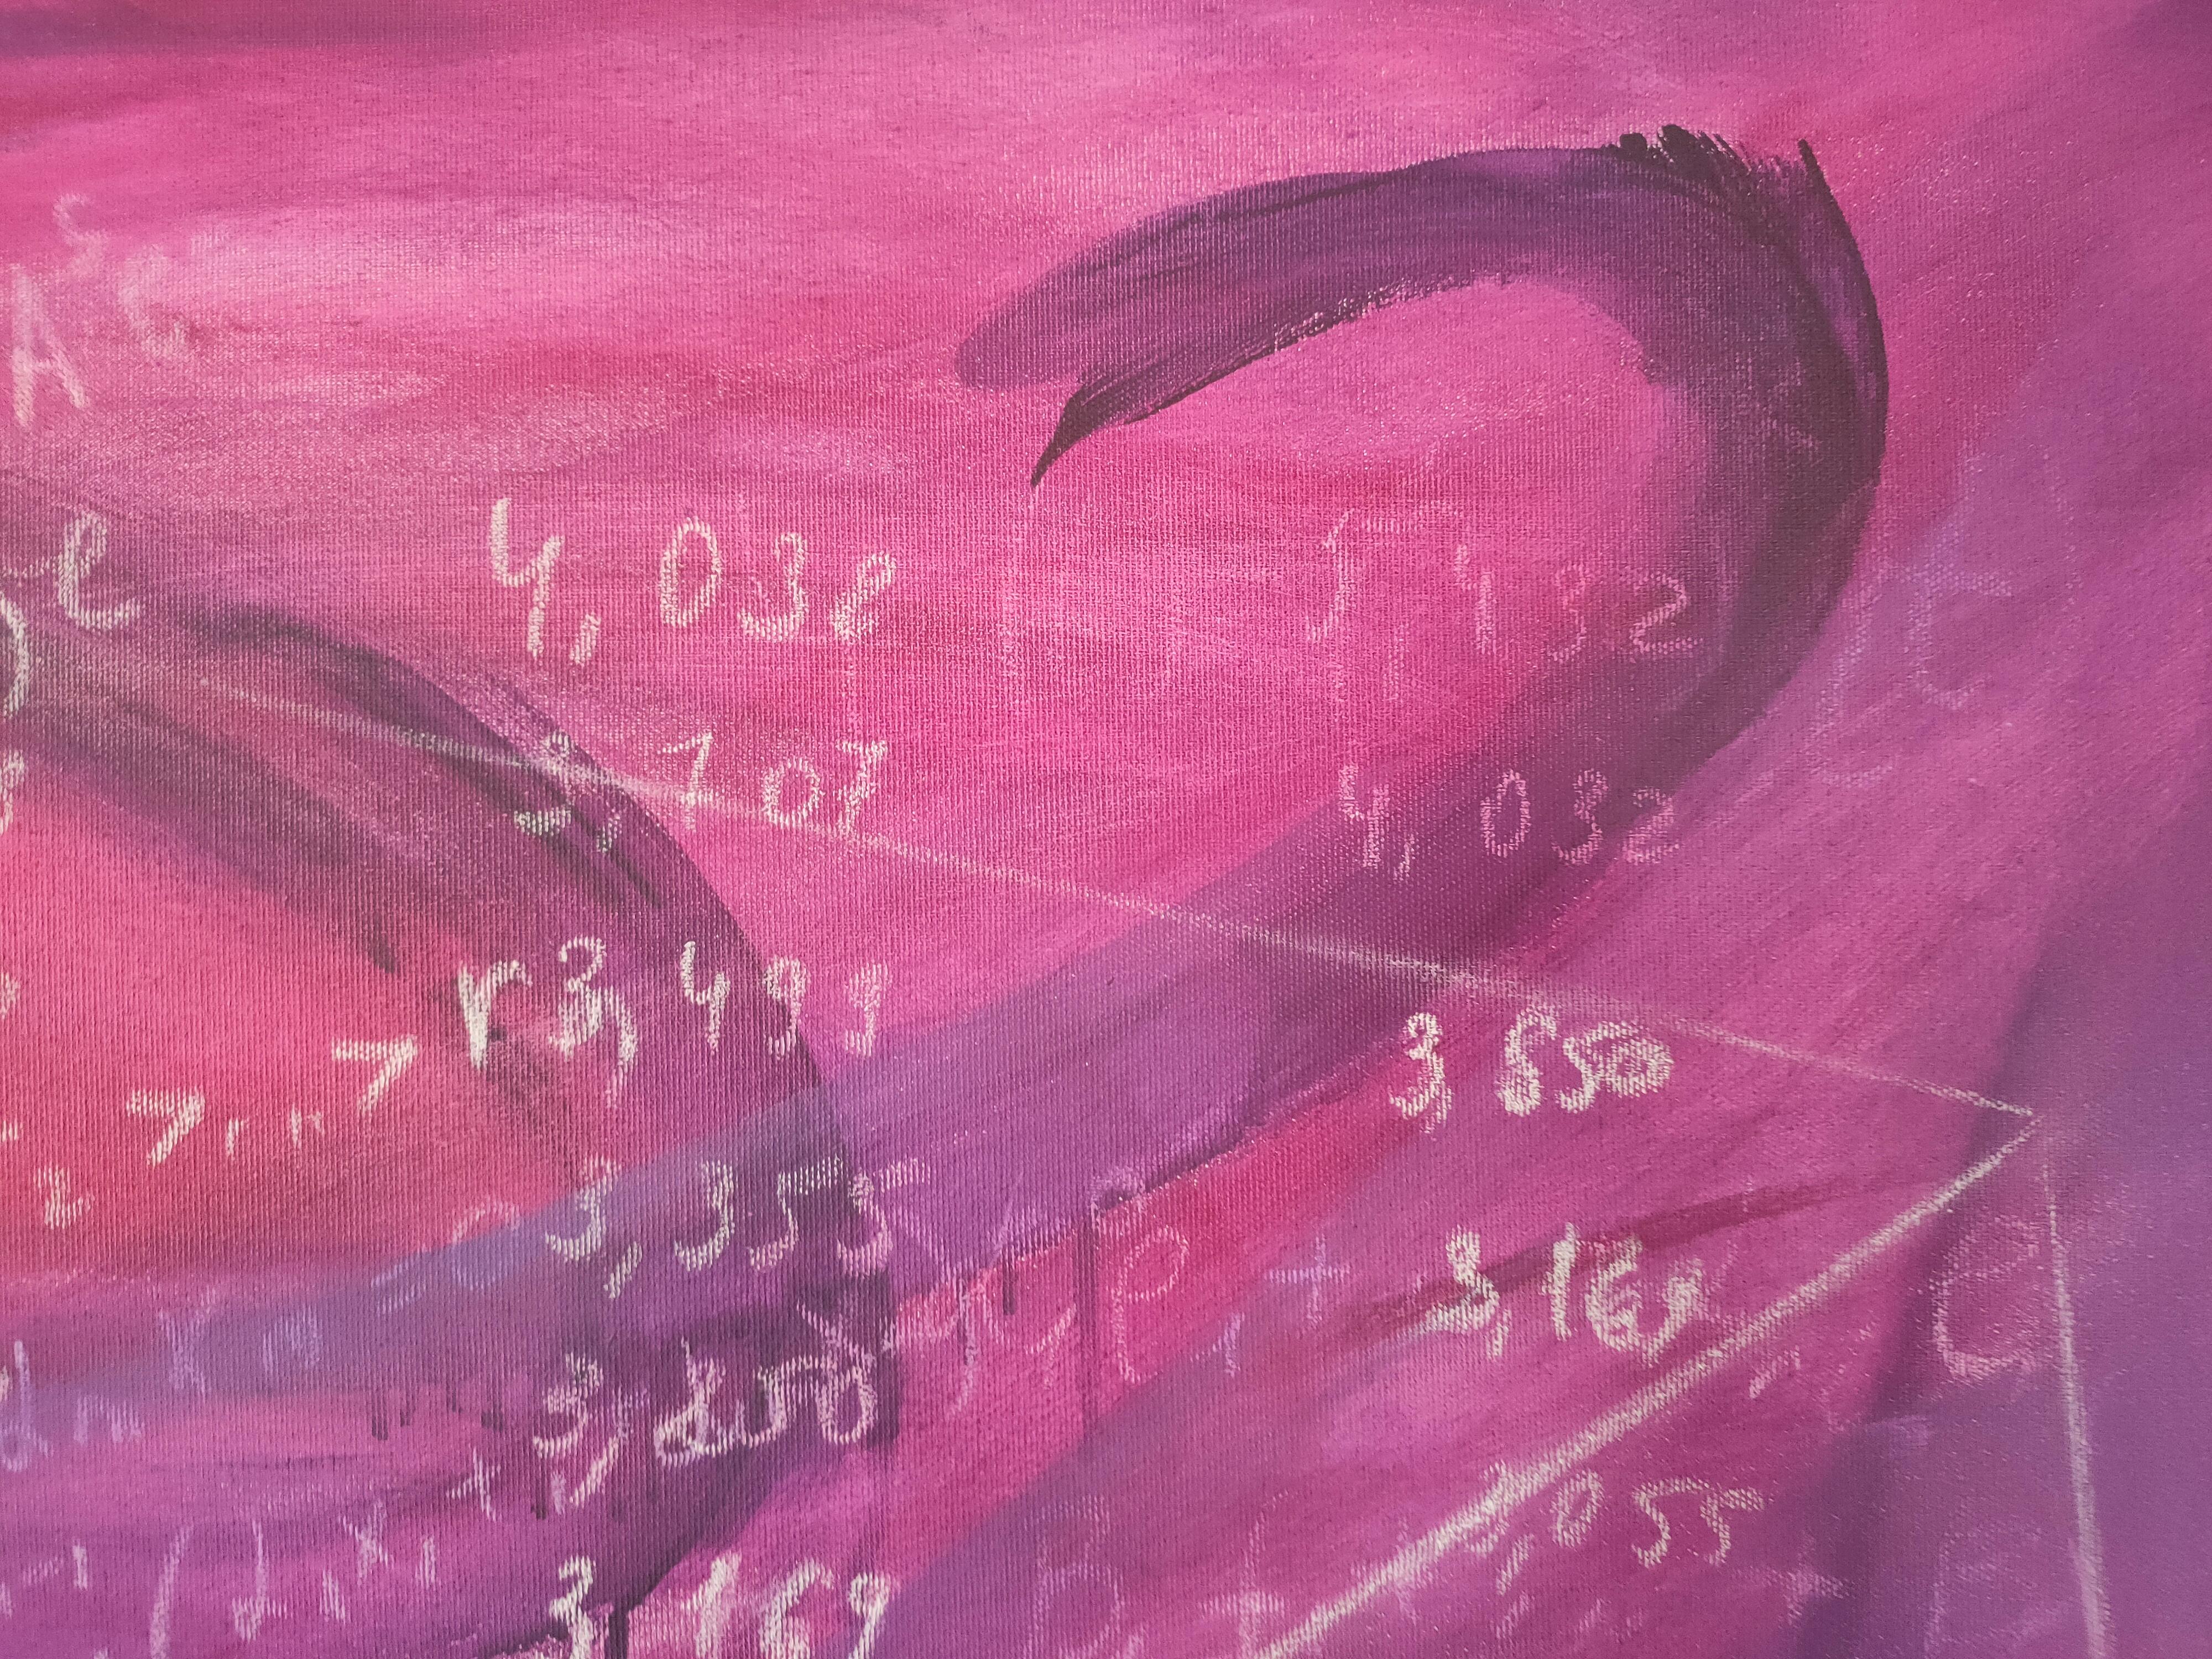 A new painting from the Scientific Art series by artist Anastasia Vasilyeva. It's an abstract work in purple and mauve tones of deep color. Mathematical formulas and drawn lines complete the composition and give it dynamism. 
The painting is made on